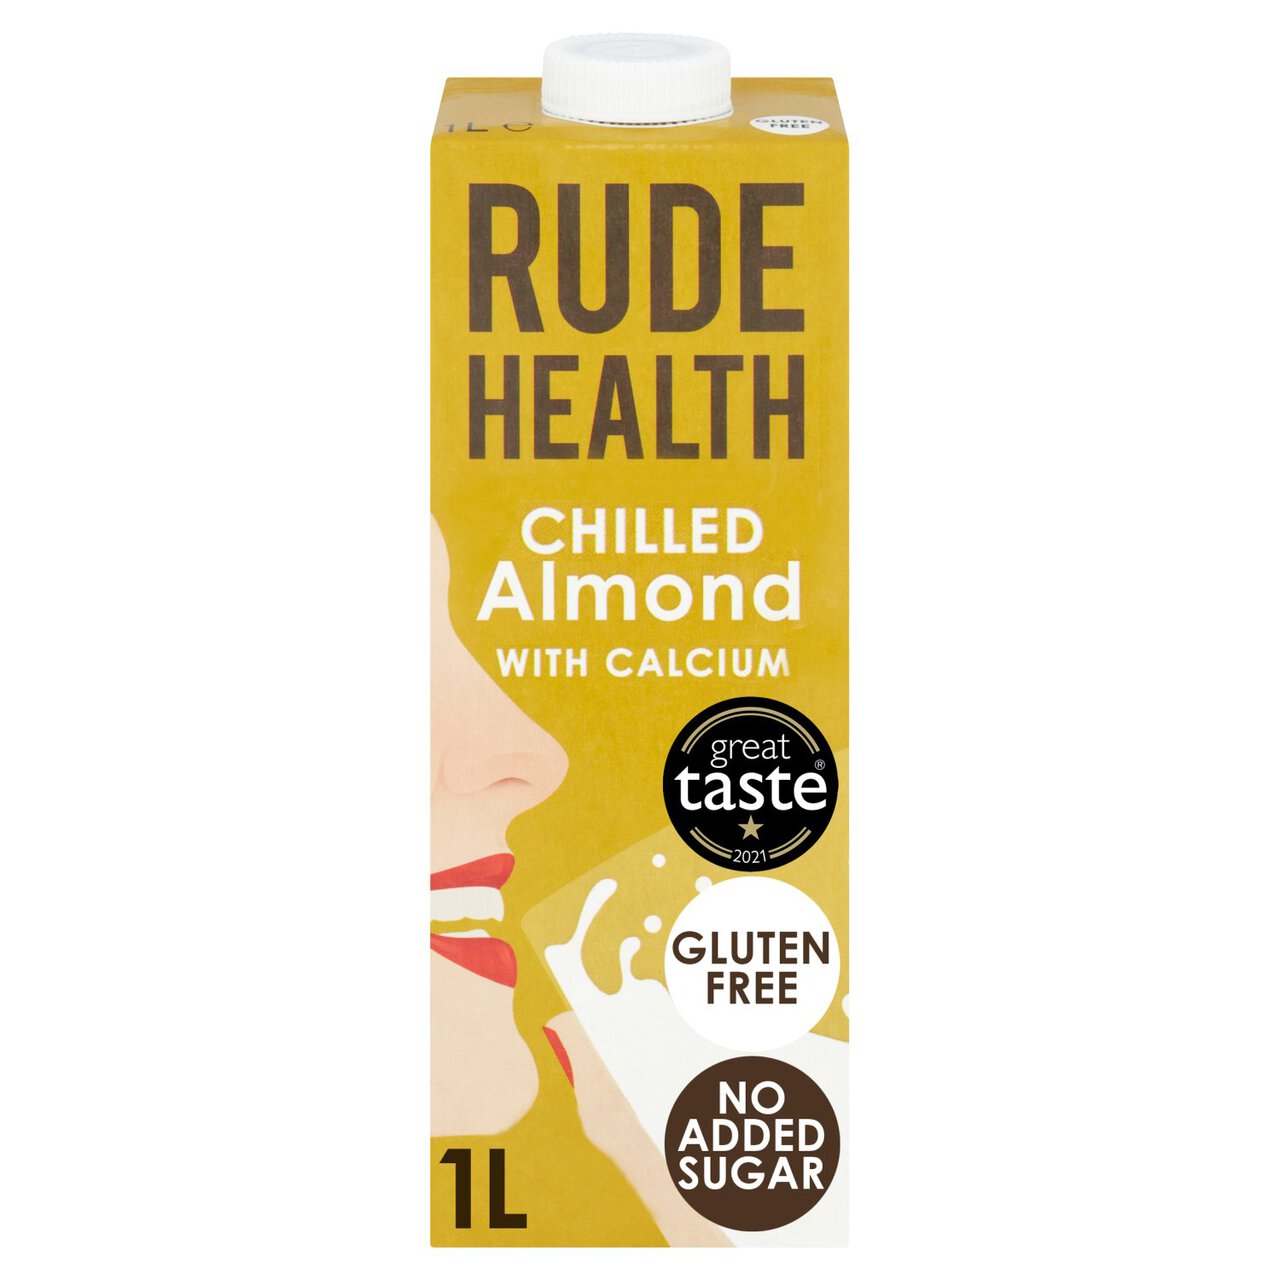 Rude Health Chilled Almond Drink 1l